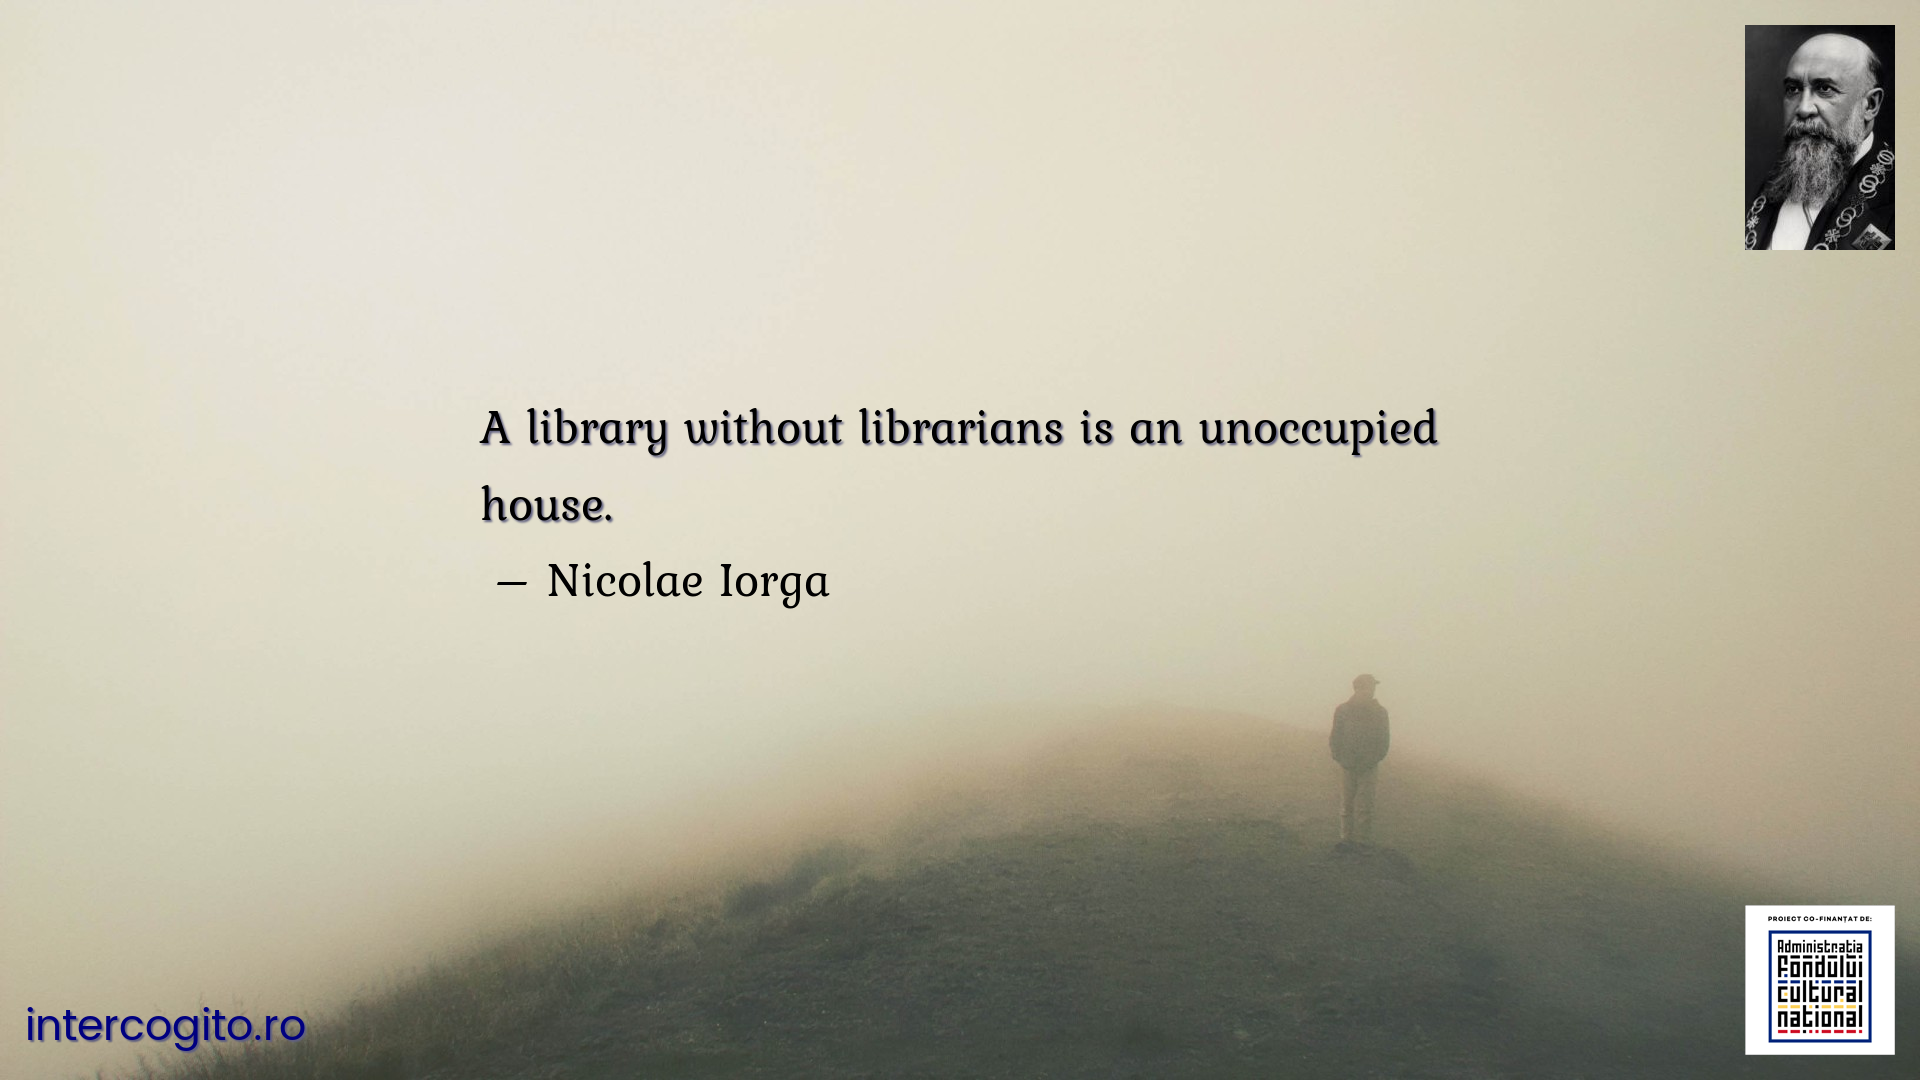 A library without librarians is an unoccupied house.